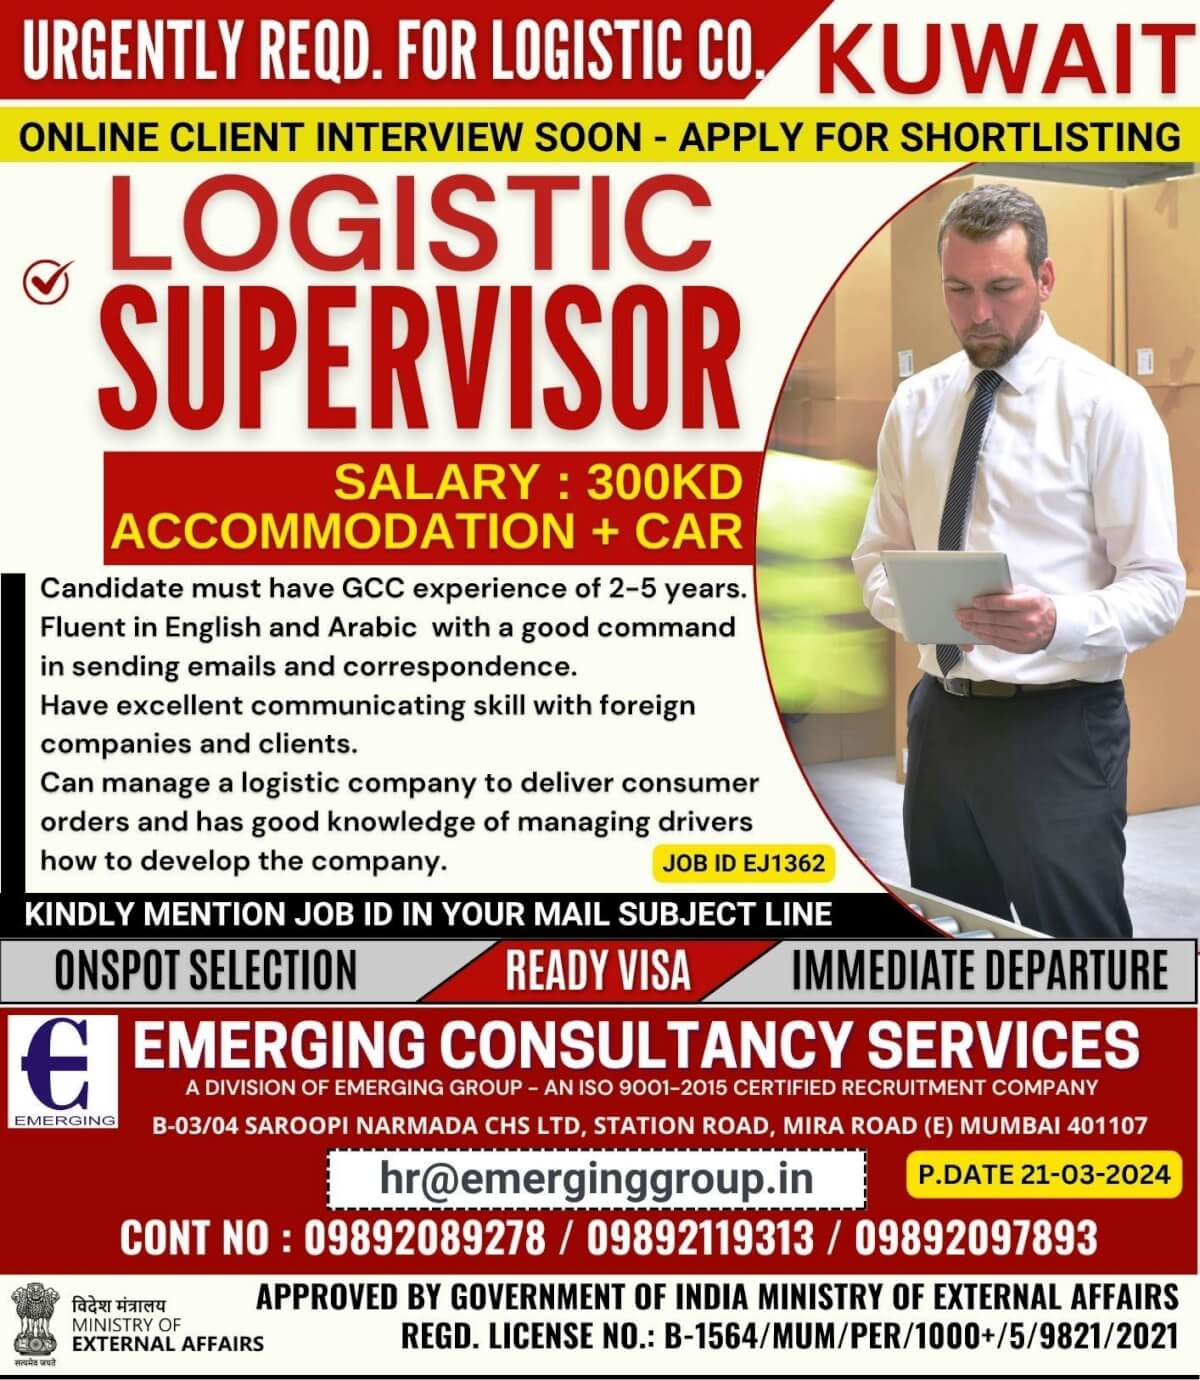 URGENTLY REQD. FOR LOGISTIC COMPANY IN KUWAIT